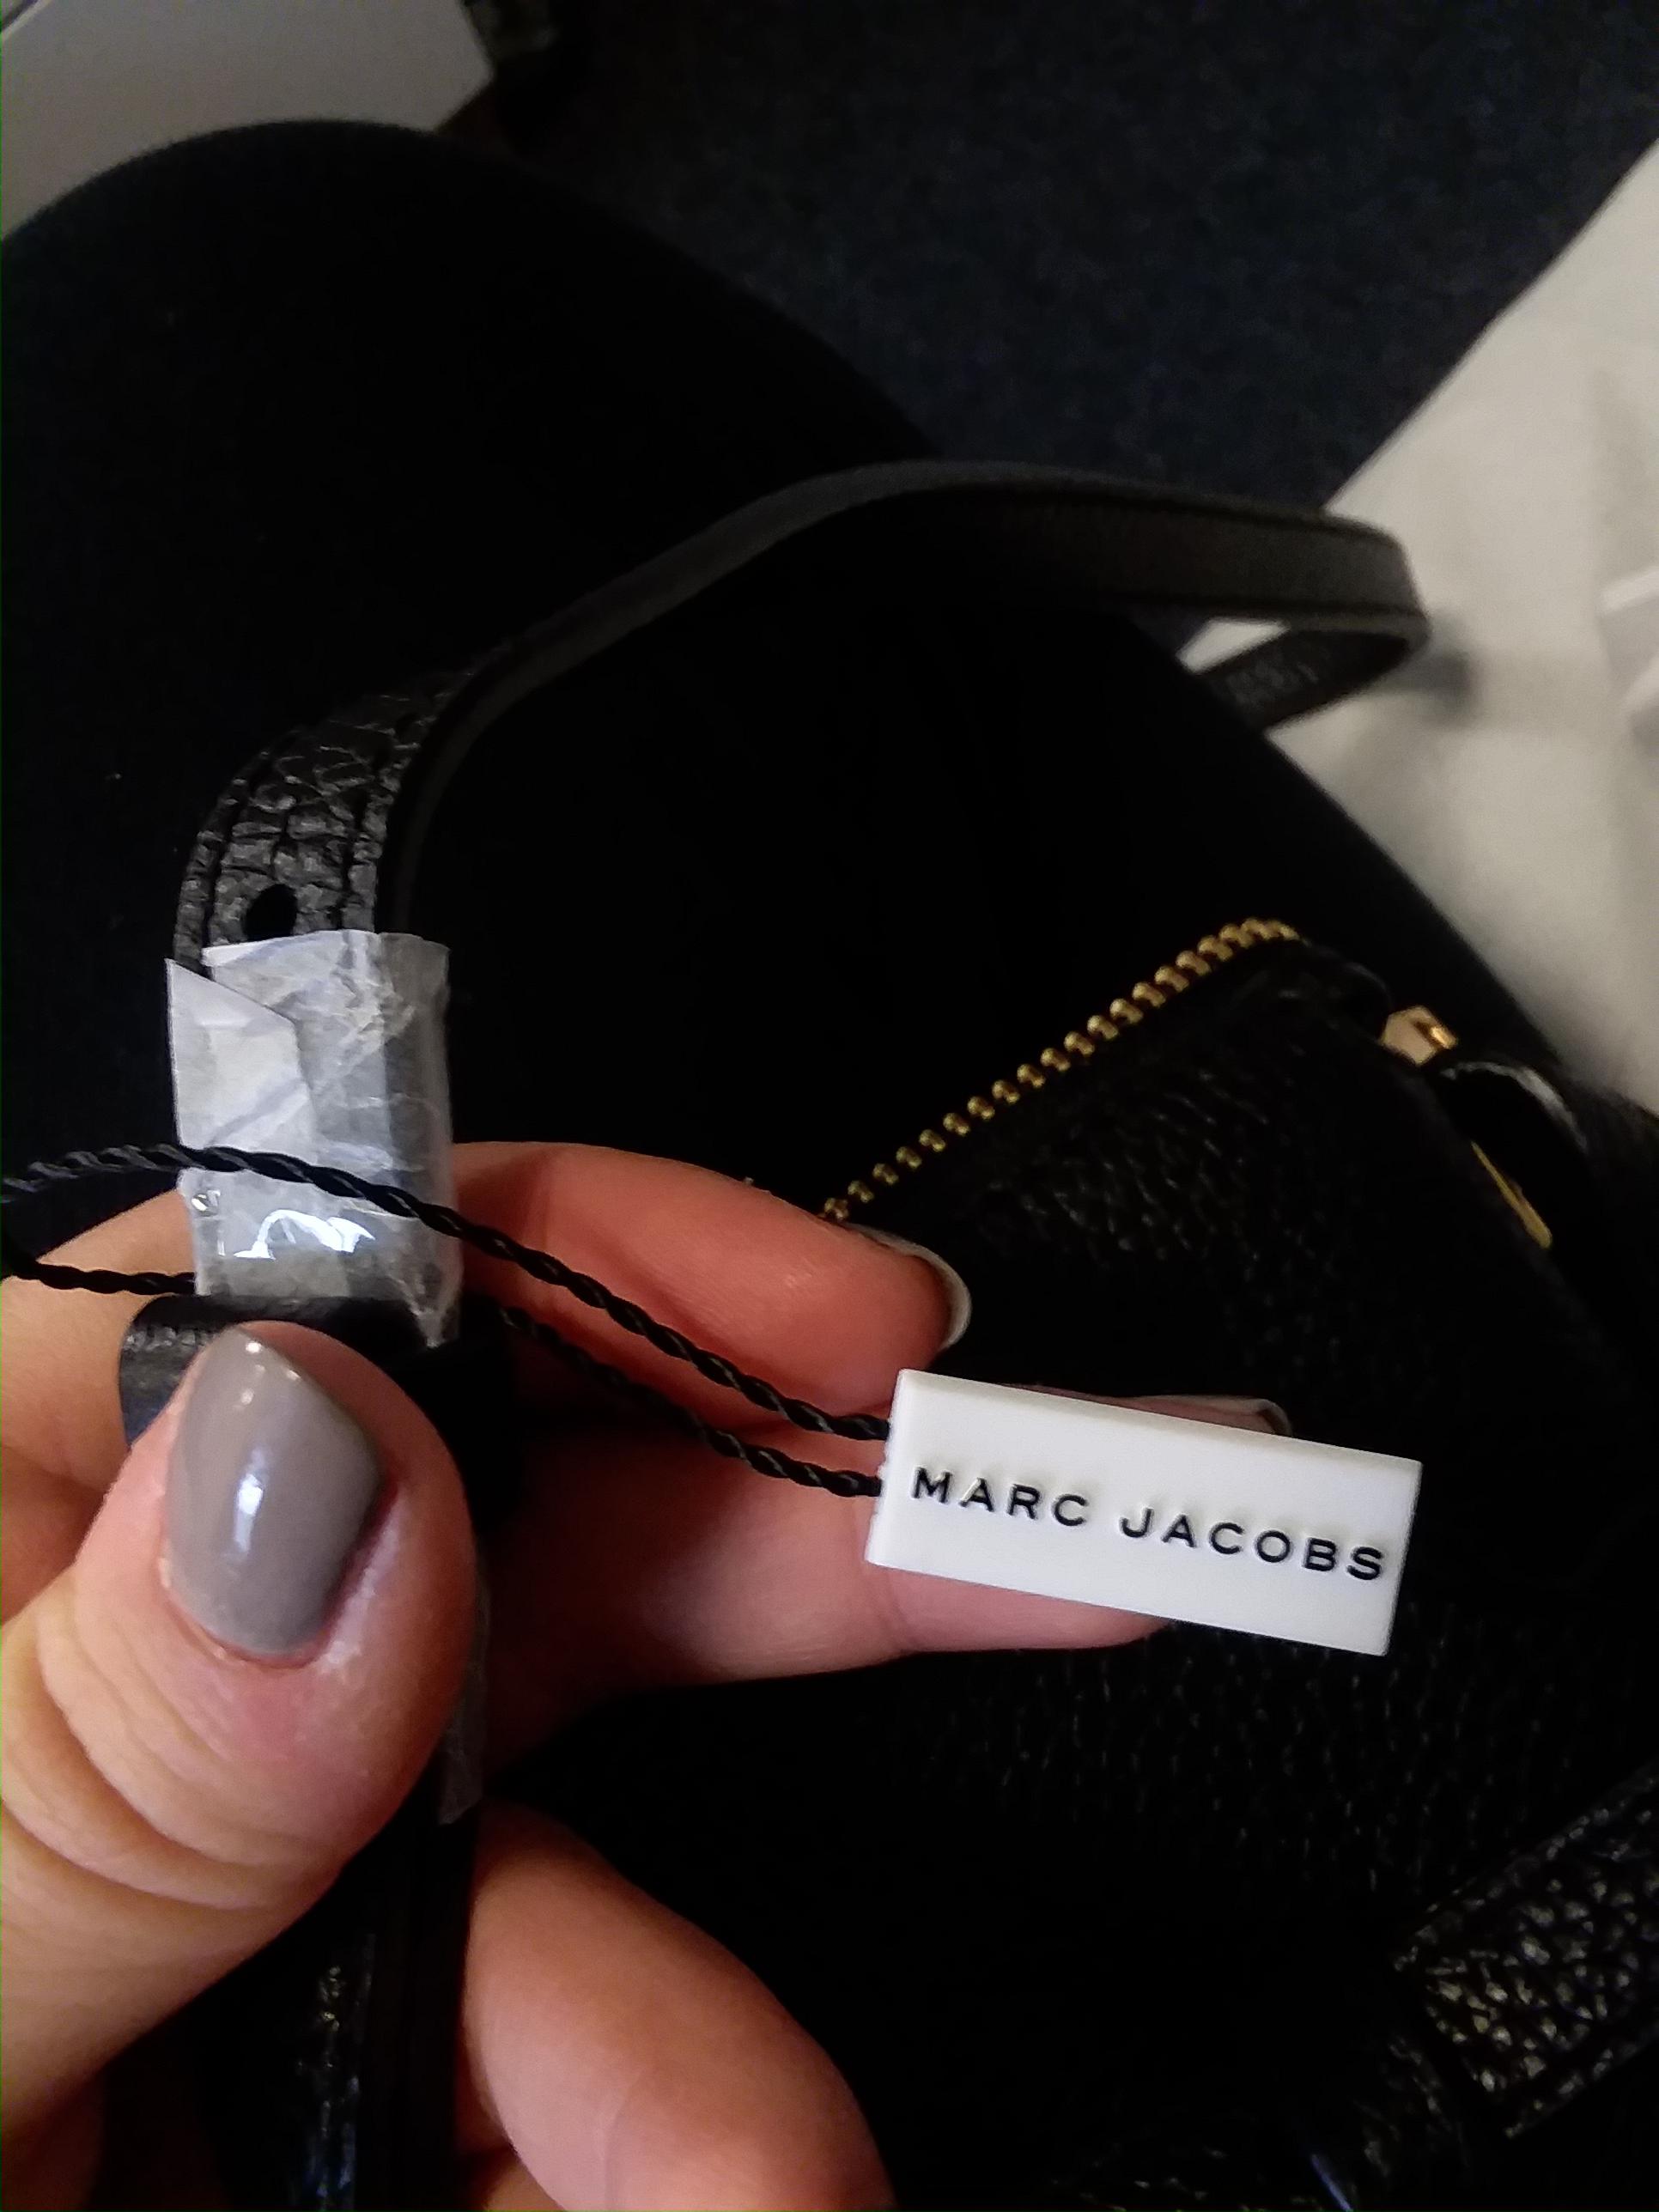 CLOSED - Authenticate This Marc Jacobs, Page 148